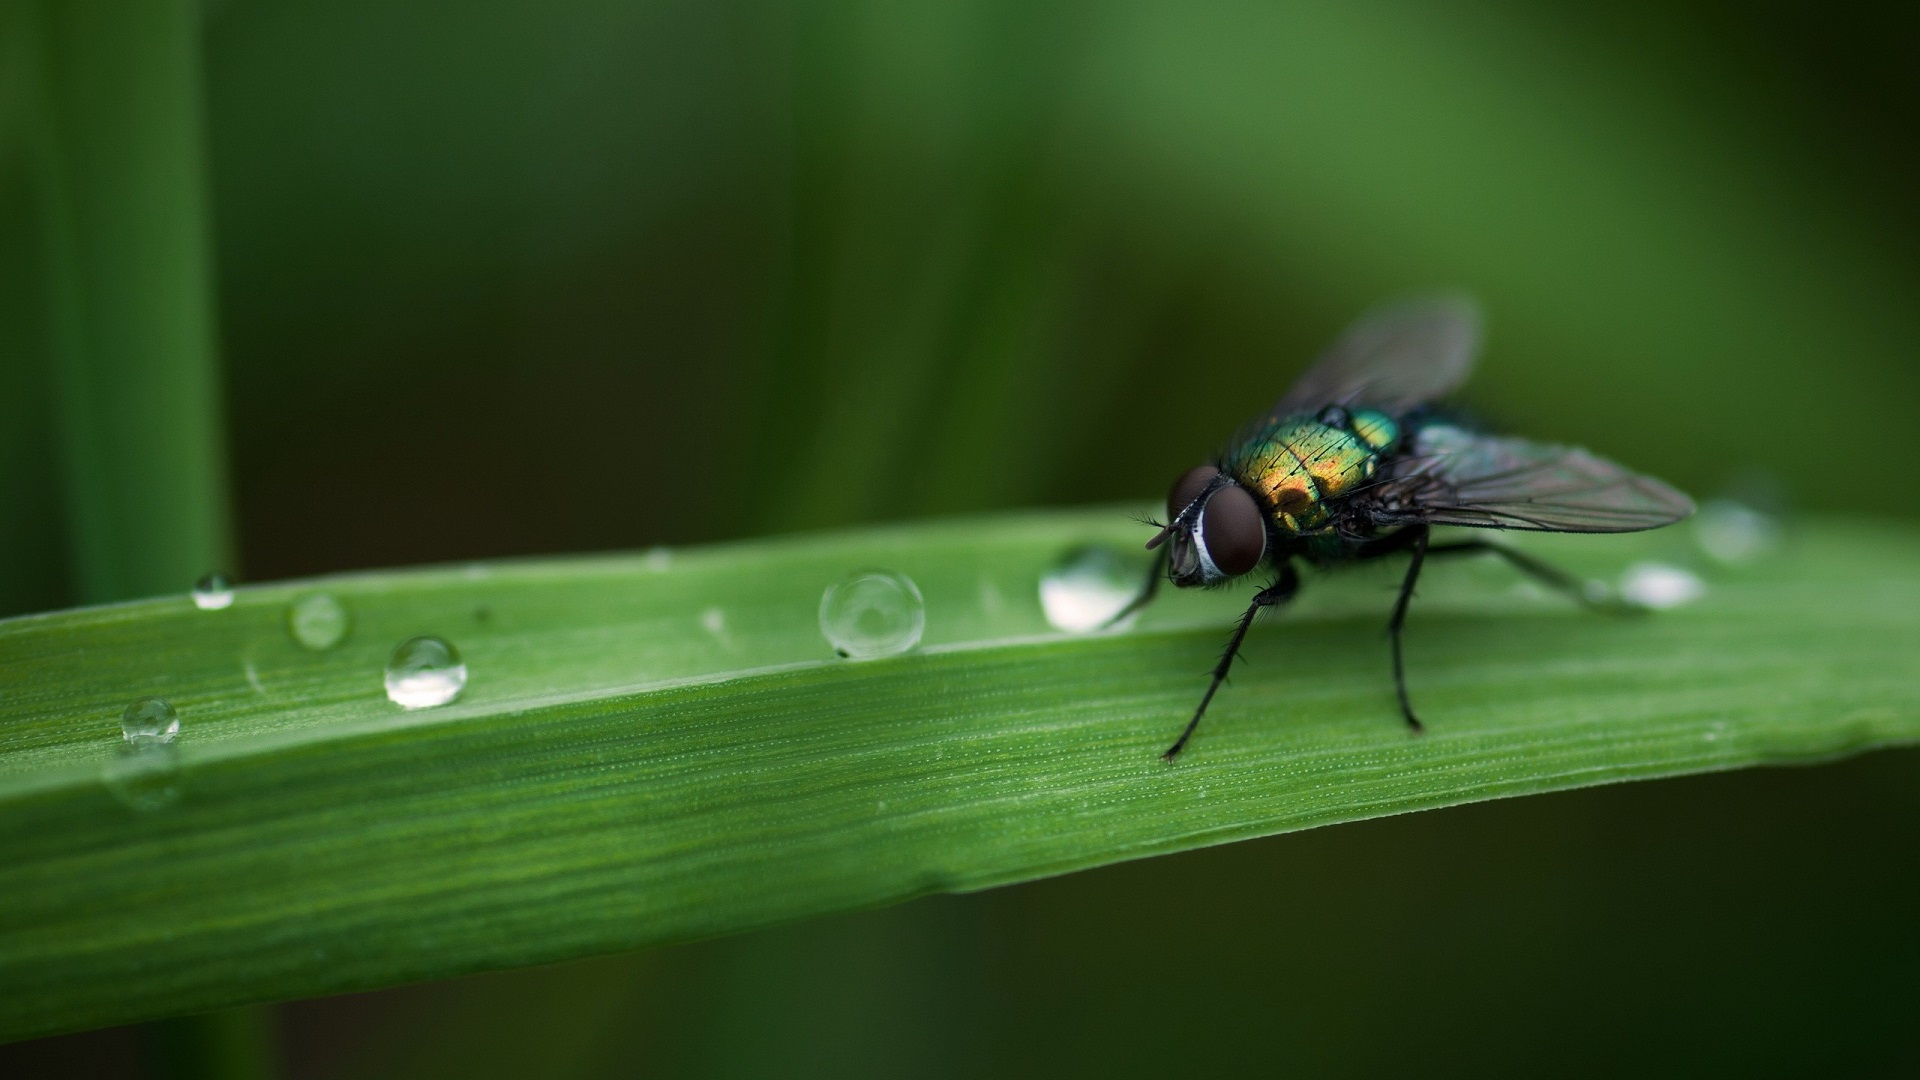 How to Get Rid of Flies on Lawn